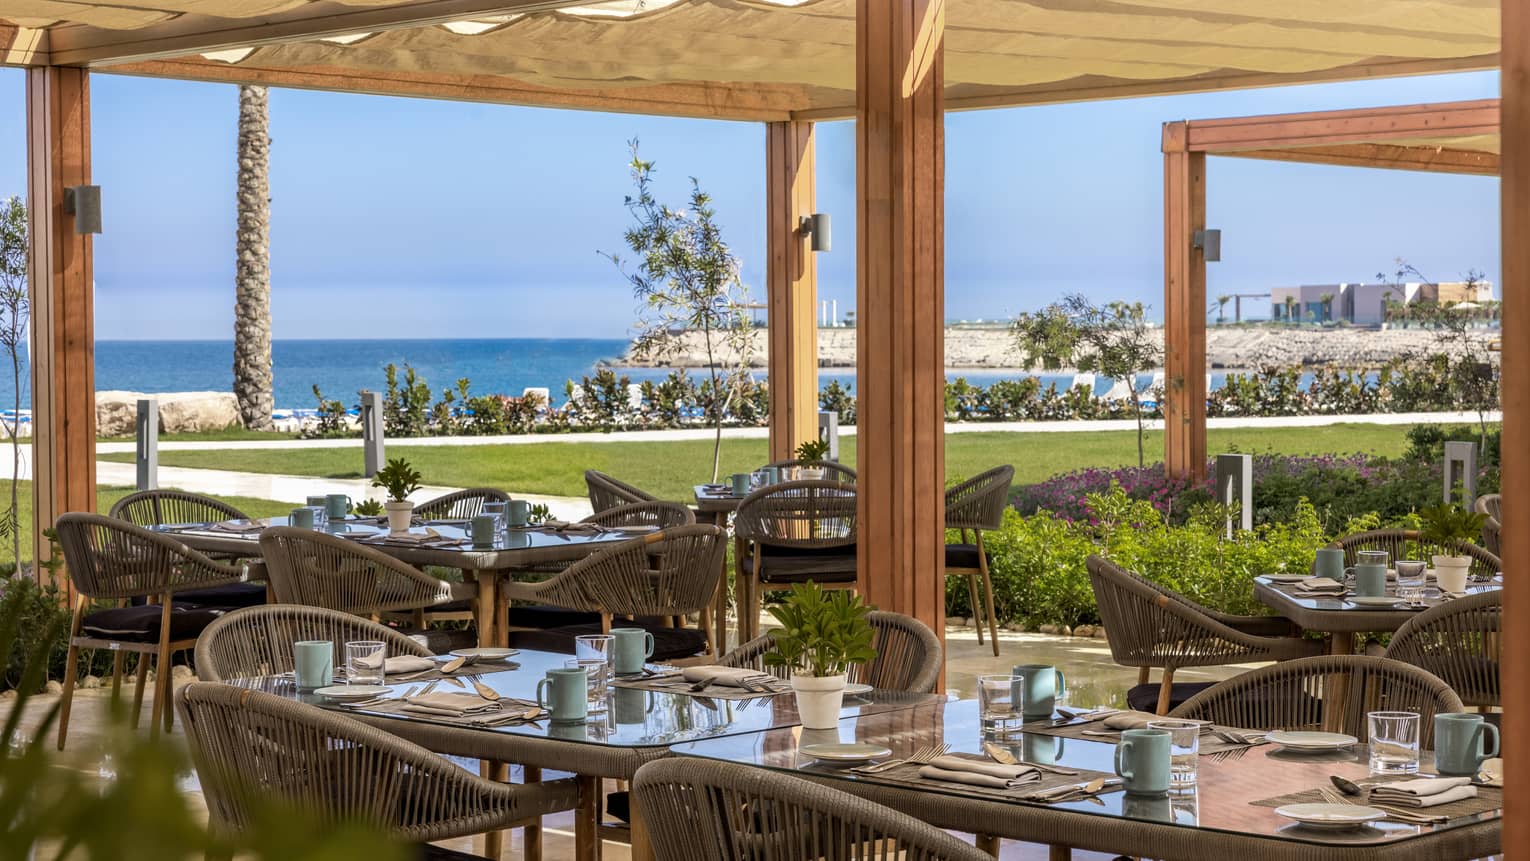 Beach Restaurant covered outdoor terrace with rattan dining chairs and views of the Mediterranean